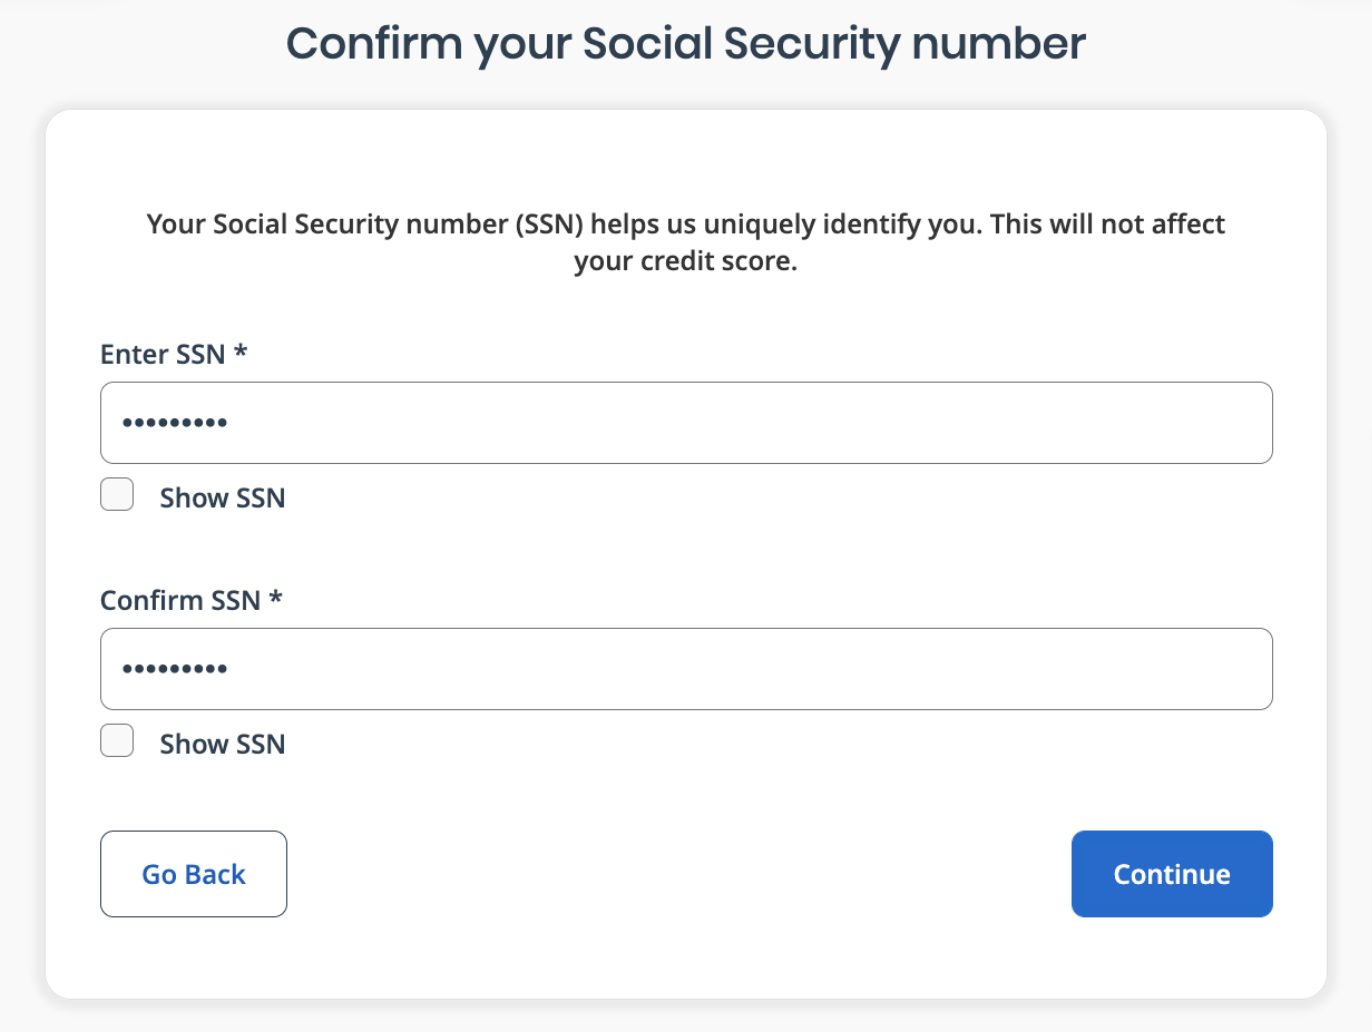 Confirm_your_Social_Security_Number.png